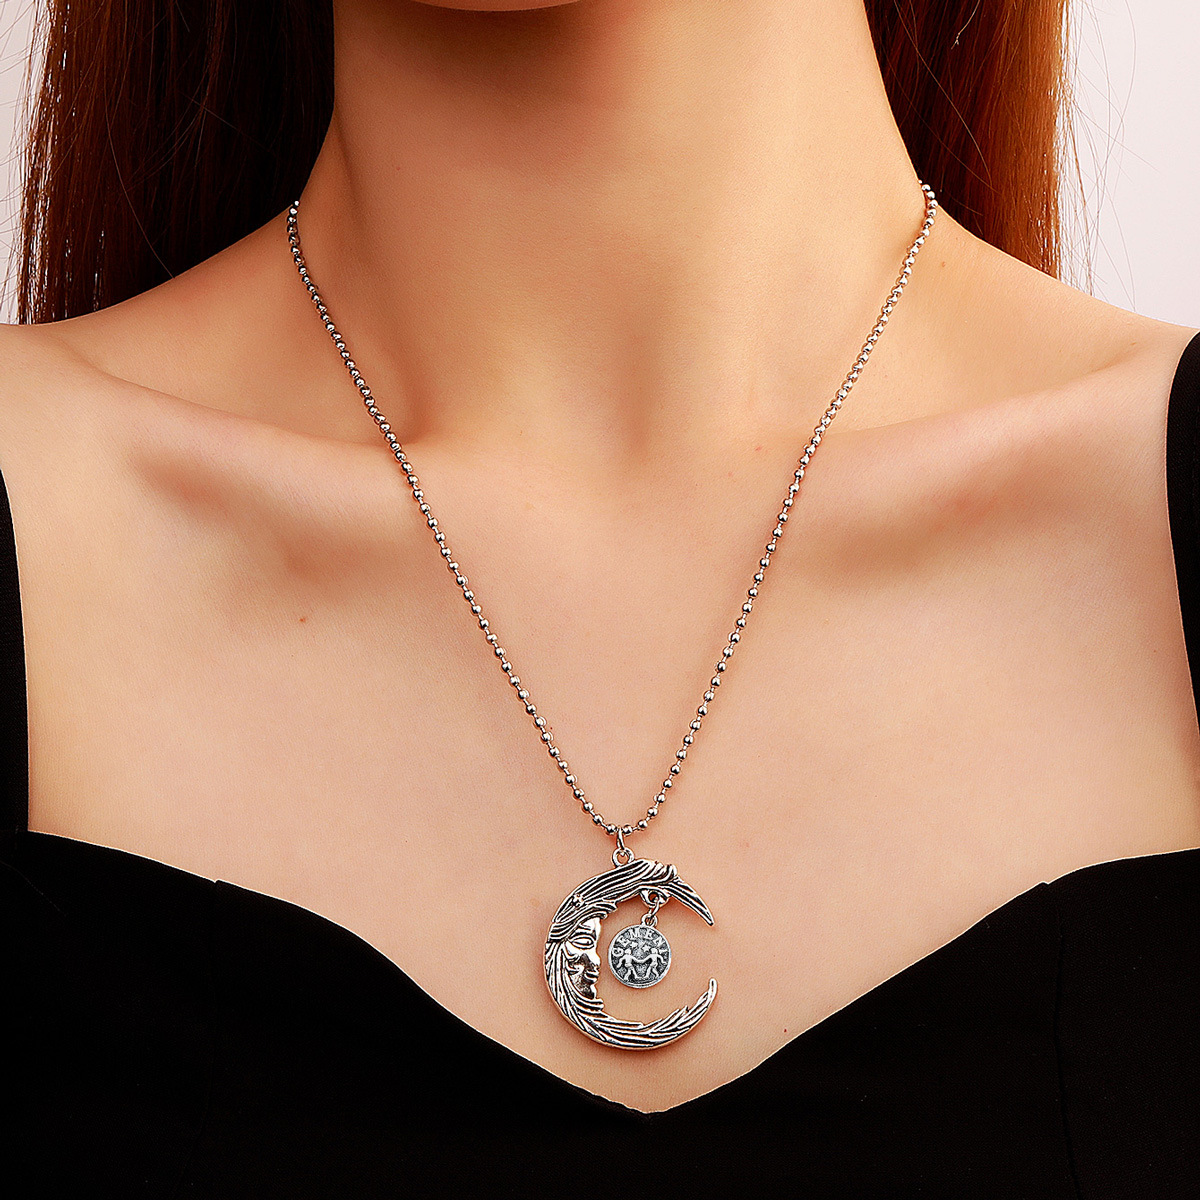 Best Seller in Europe and America New Twelve Constellation Pendant Necklace Simple Alloy Hollow Moon Clavicle Chain Long Sweater Chainpicture3